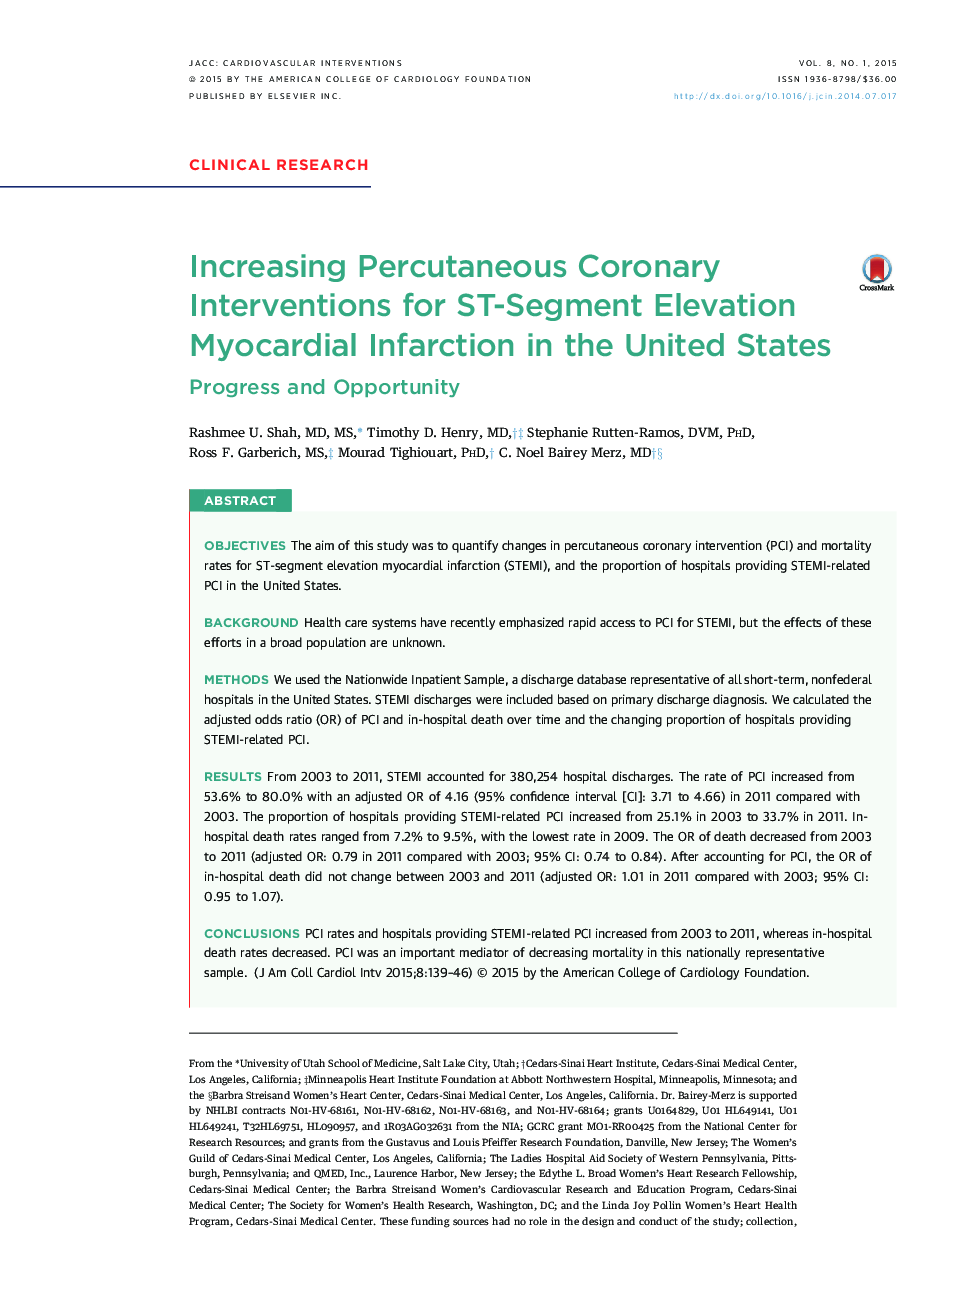 Increasing Percutaneous Coronary Interventions for ST-Segment Elevation Myocardial Infarction in the United States: Progress and Opportunity